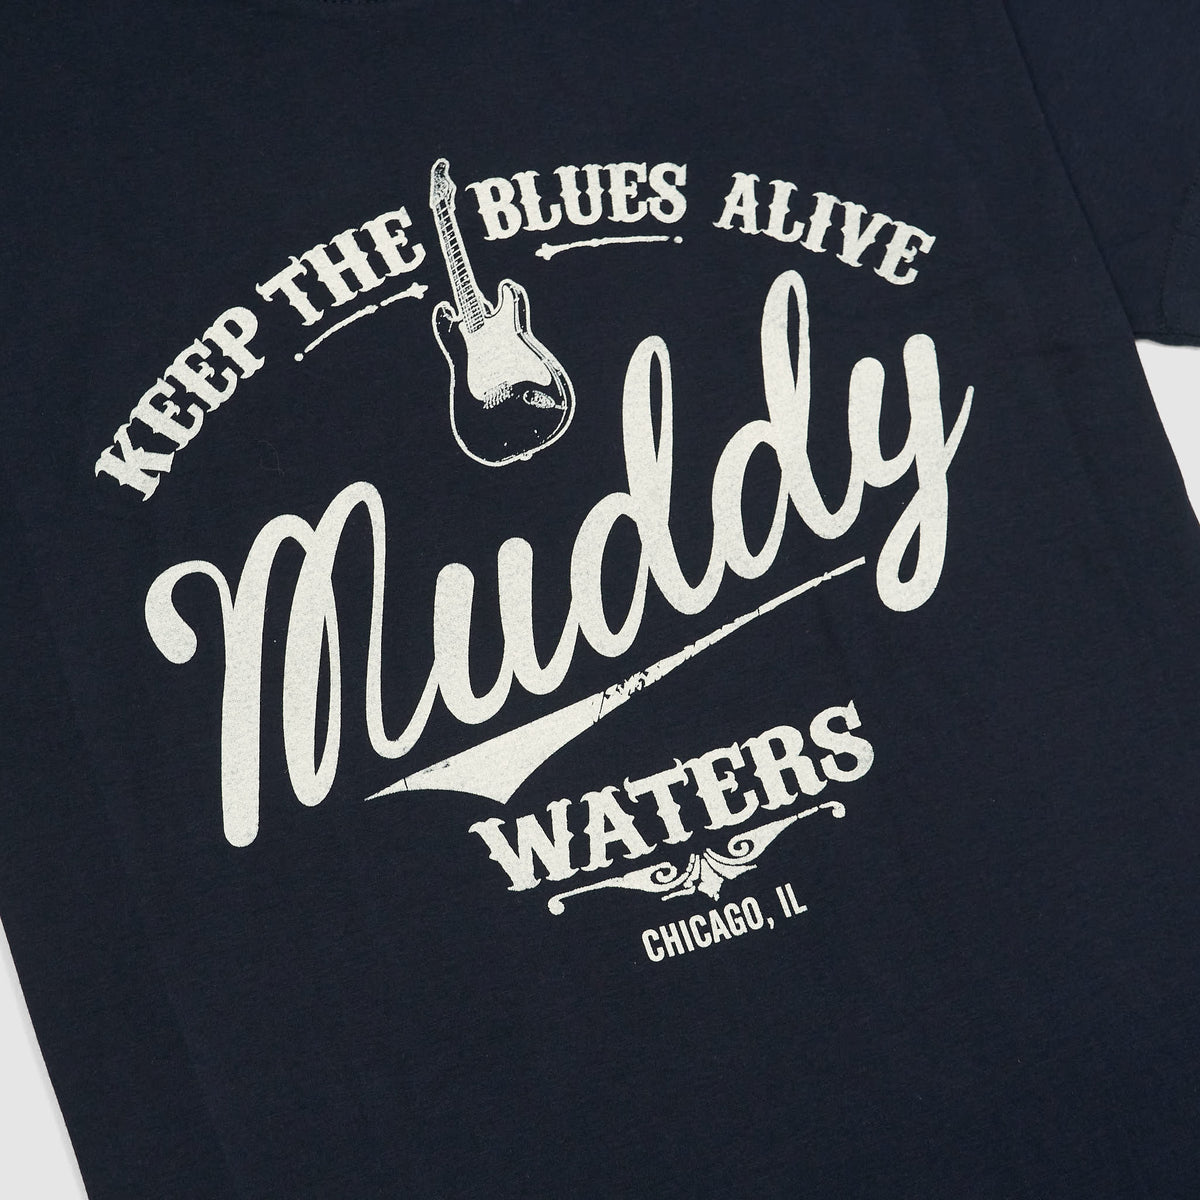 Muddy Waters Crew Neck Rock T-Shirt Keep the Blues Alive